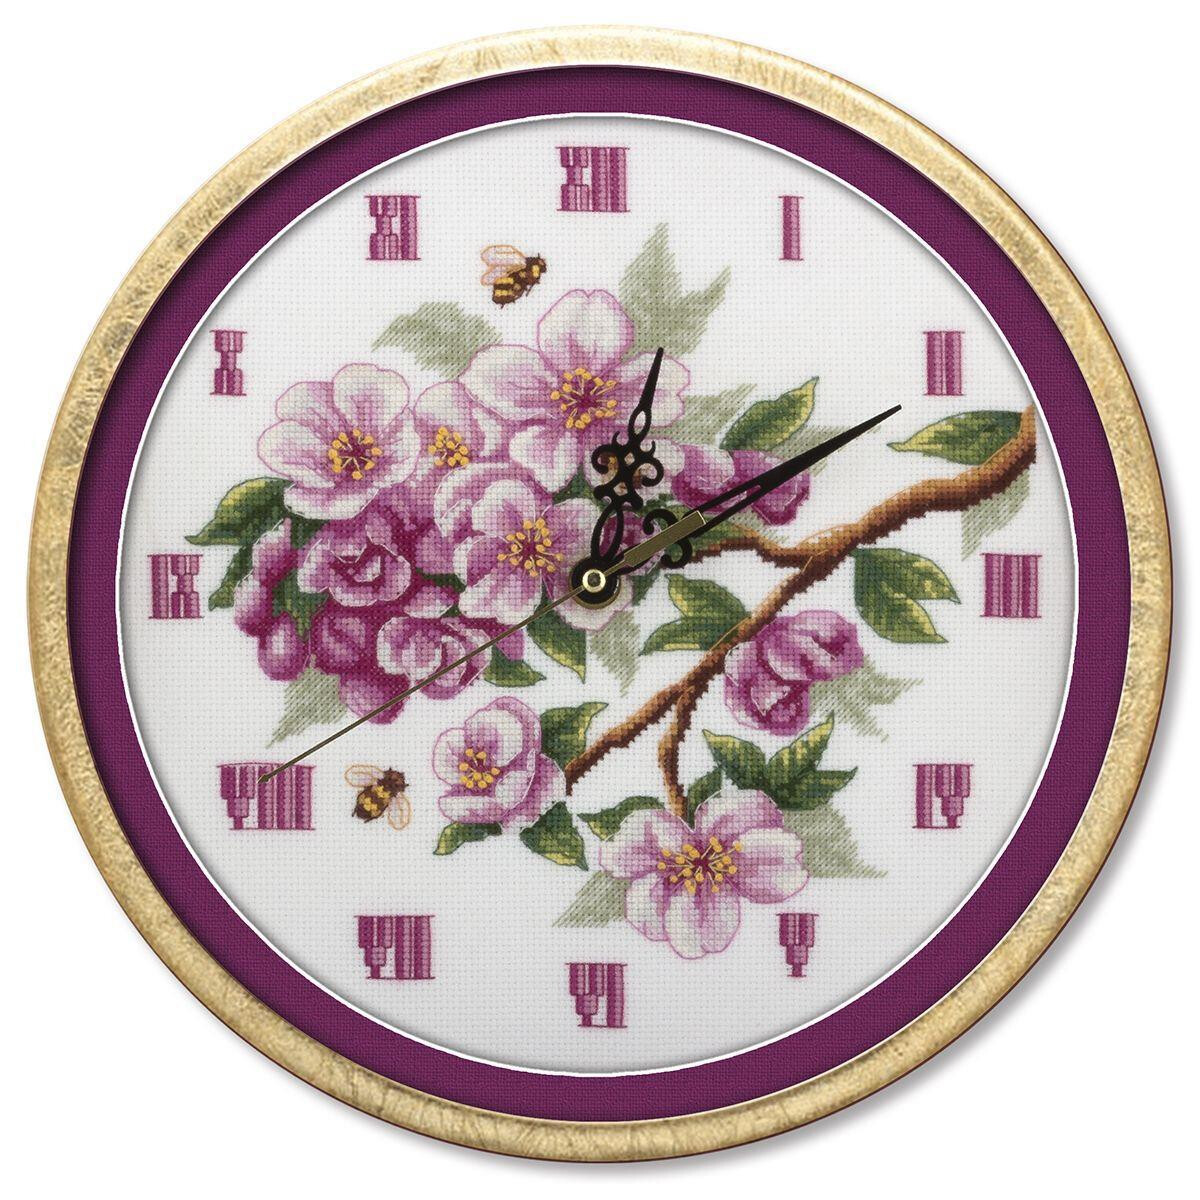 Panna counted cross stitch kit "Clock. Gardens are...